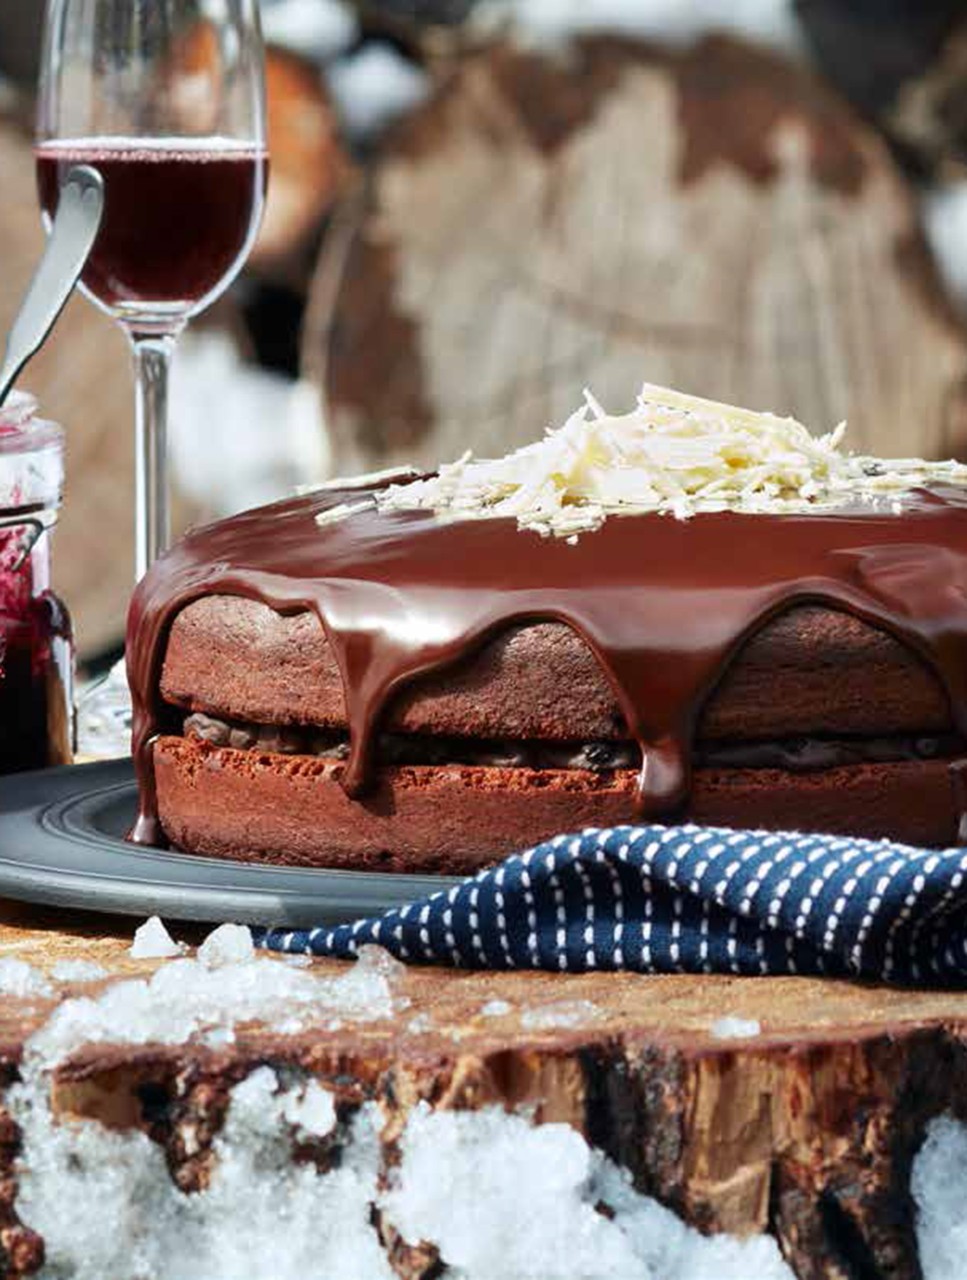 Triple-Chocolate Carrot Cake with Blueberry Compote